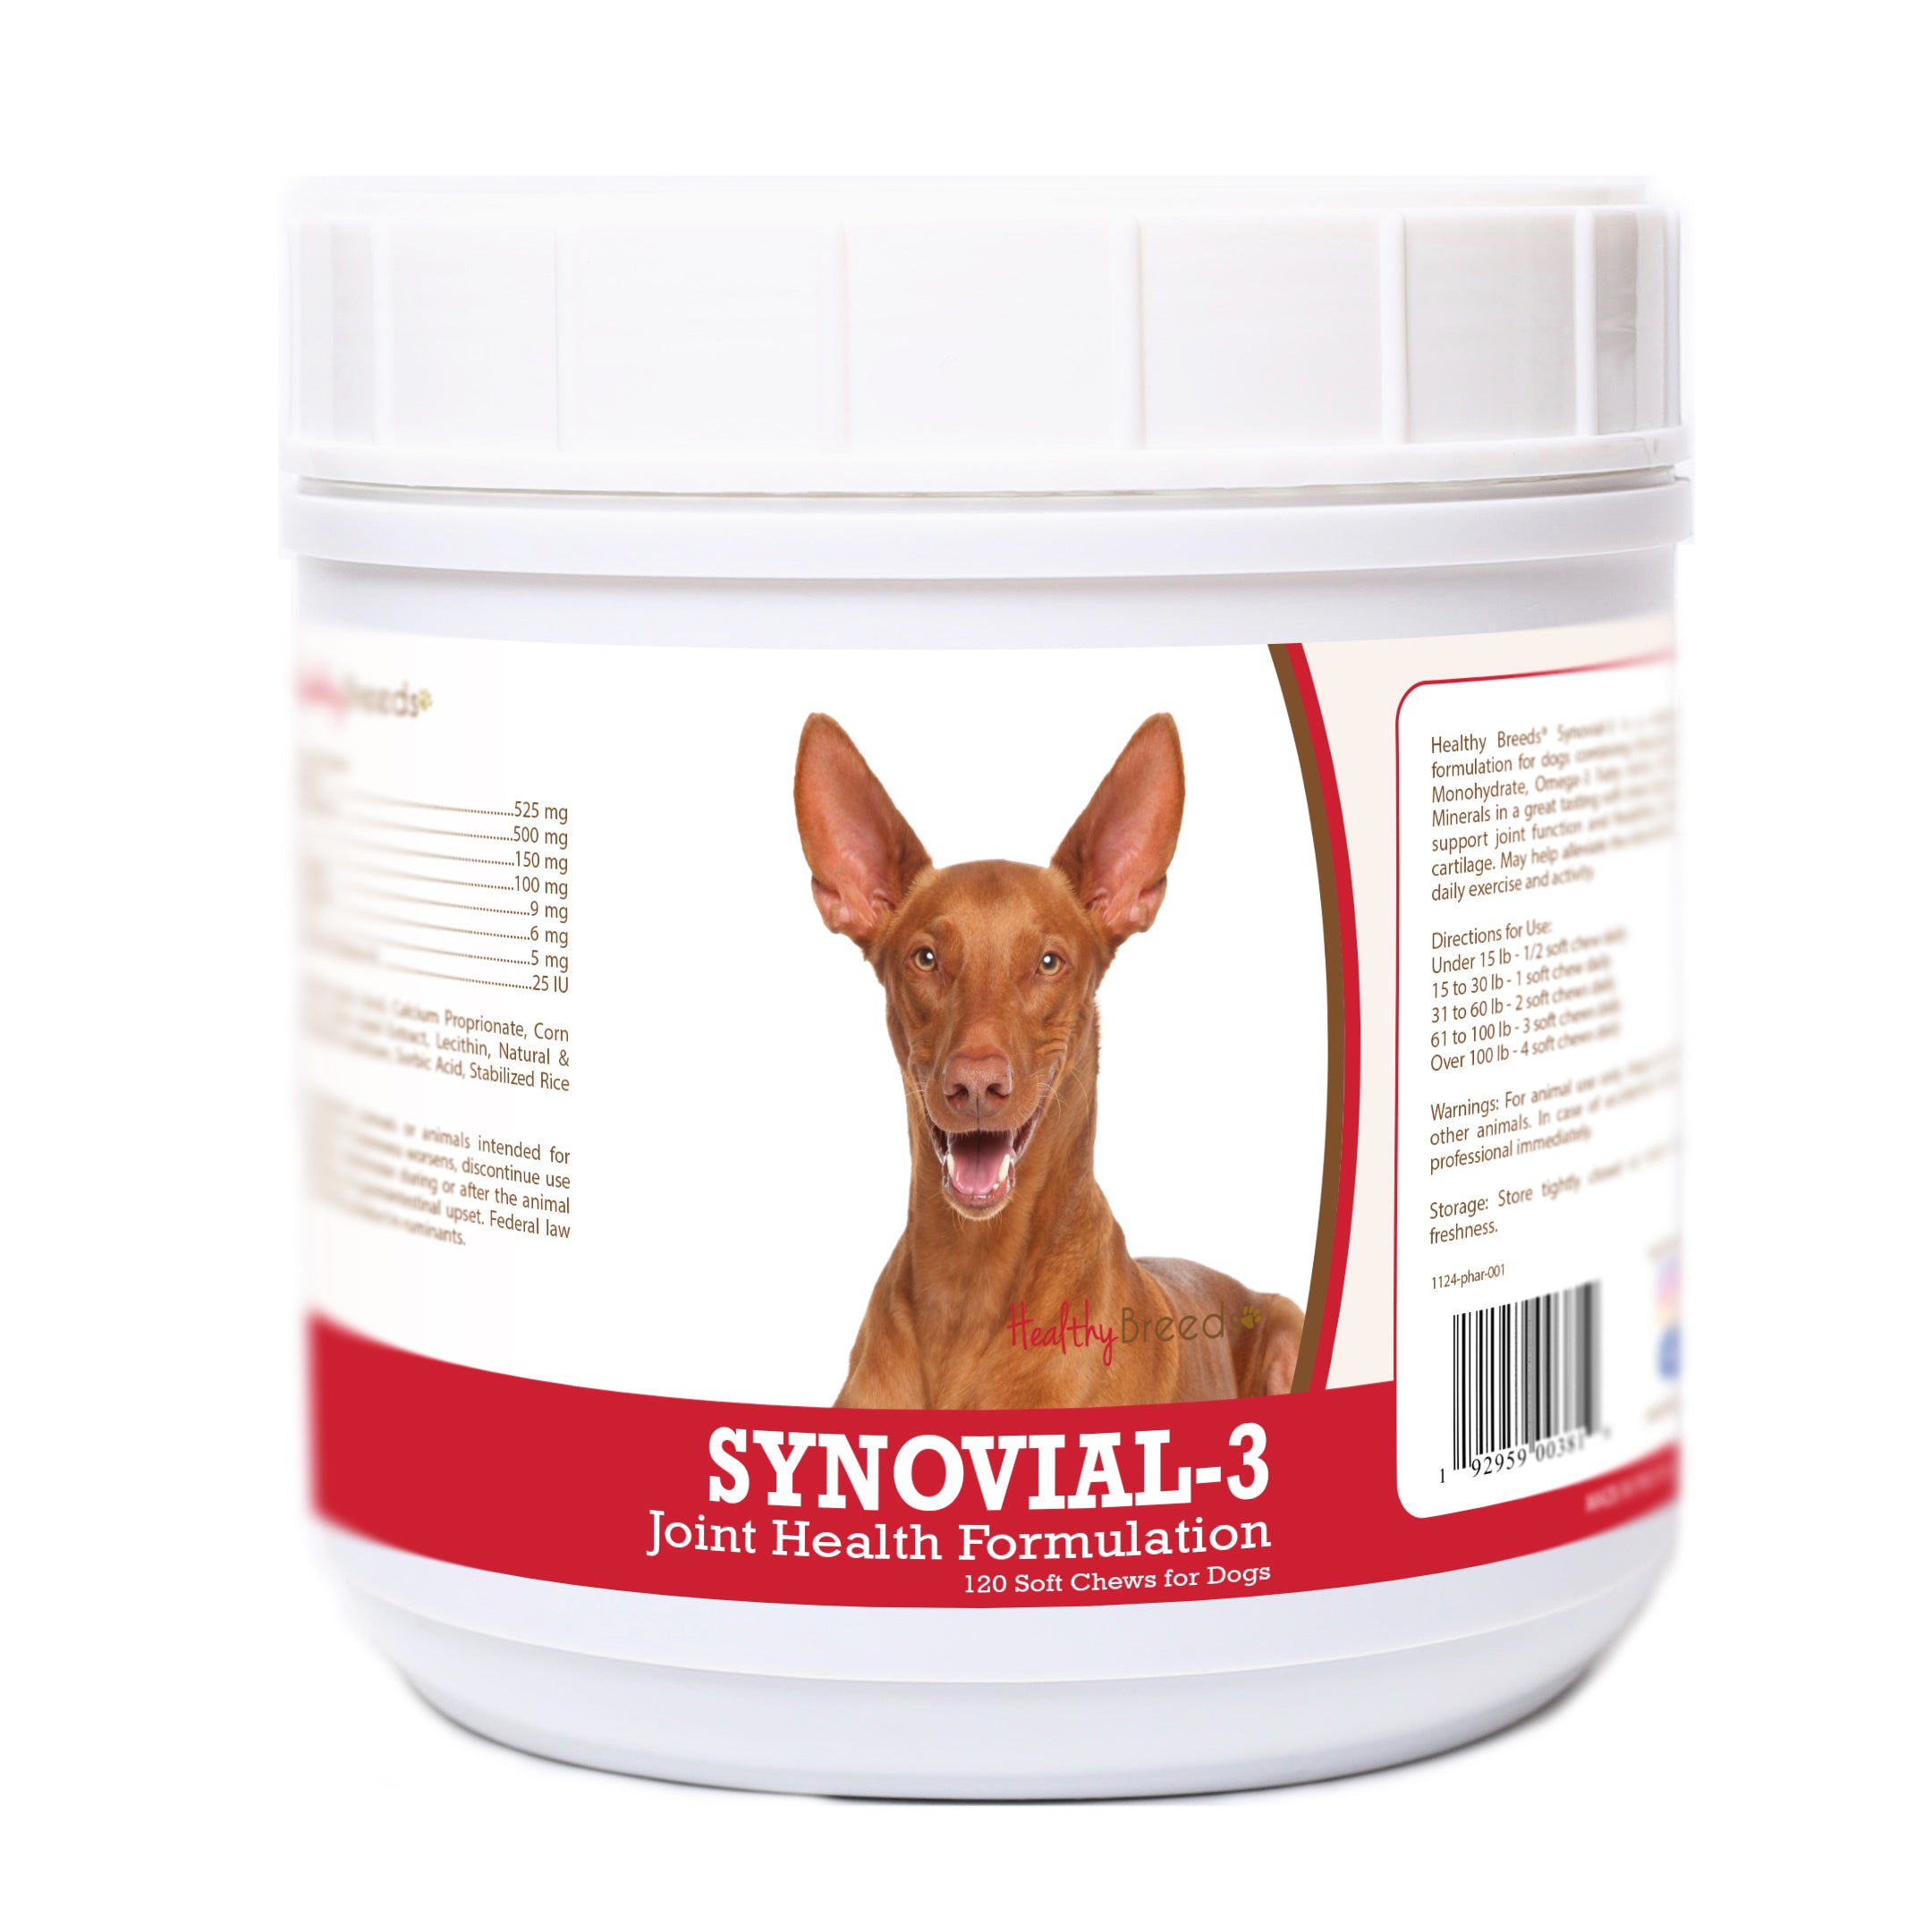 Pharaoh Hound Synovial-3 Joint Health Formulation Soft Chews 120 Count